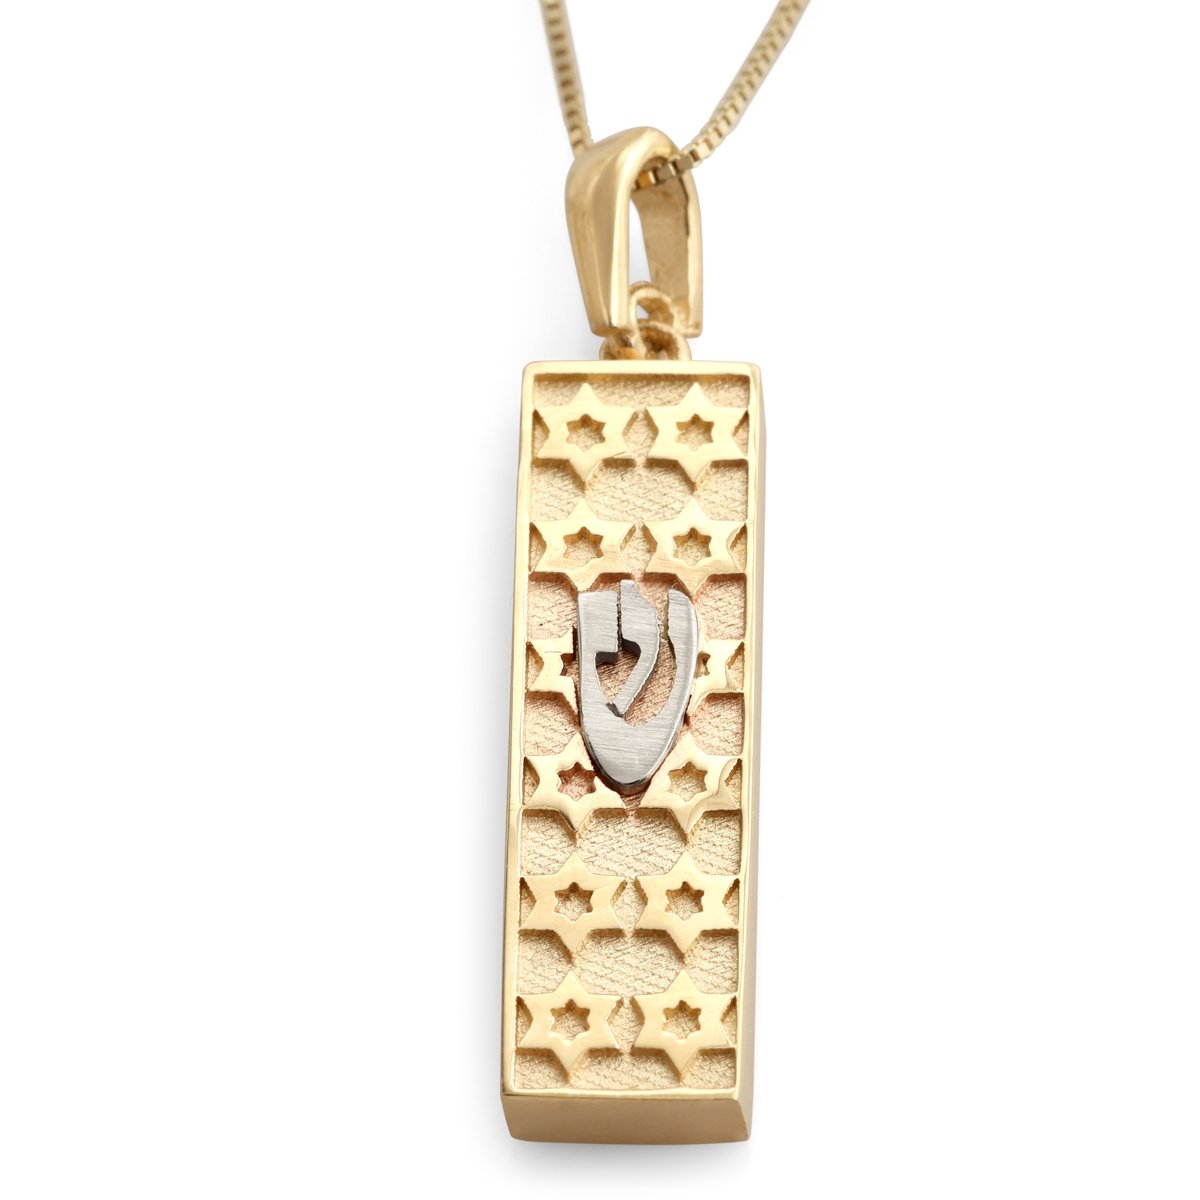 14K Gold Star of David Mezuzah Case Pendant Necklace With Hebrew Letter Shin (Choice of Colors) - 1